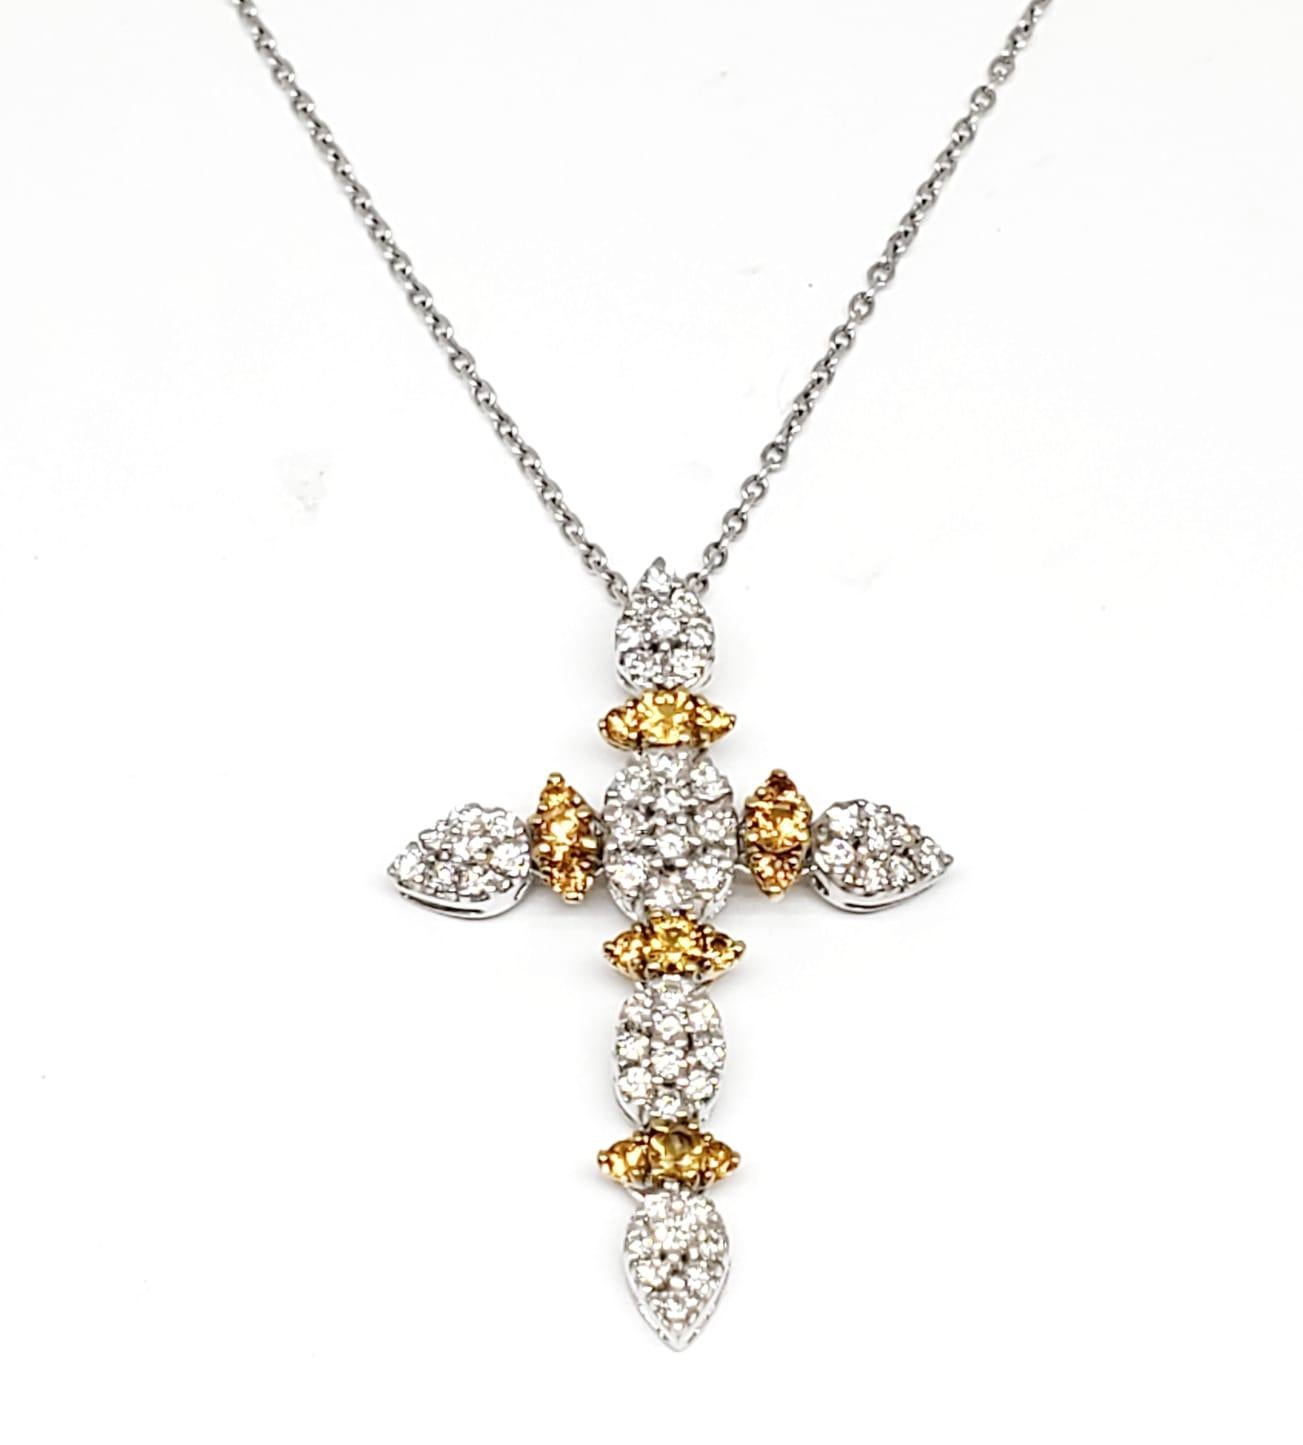 Andreoli Diamond Sapphire 18 Karat Gold Cross Necklace

This necklace features:
- 1.60 Carat Diamond
- 1.27 Carat Sapphire
- 10.65g 18k Two-Tone Gold
- Made In Italy